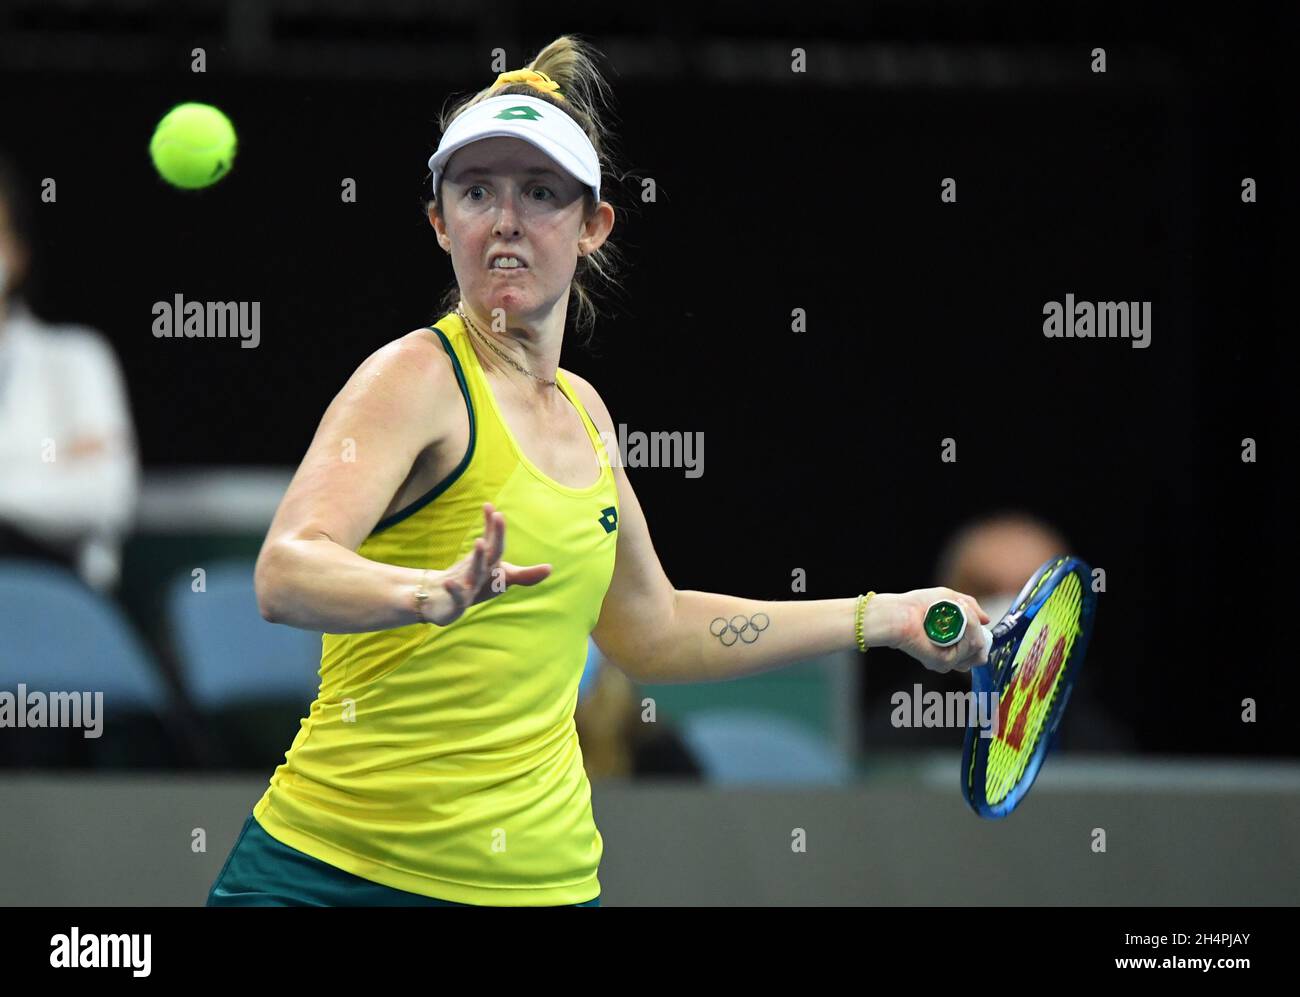 Prague, Czech Republic. 04th Nov, 2021. Storm Sanders of Australia plays  against Yuliya Hatouka of Belarus during Group B match of the women's tennis  Billie Jean King Cup (former Fed Cup) in